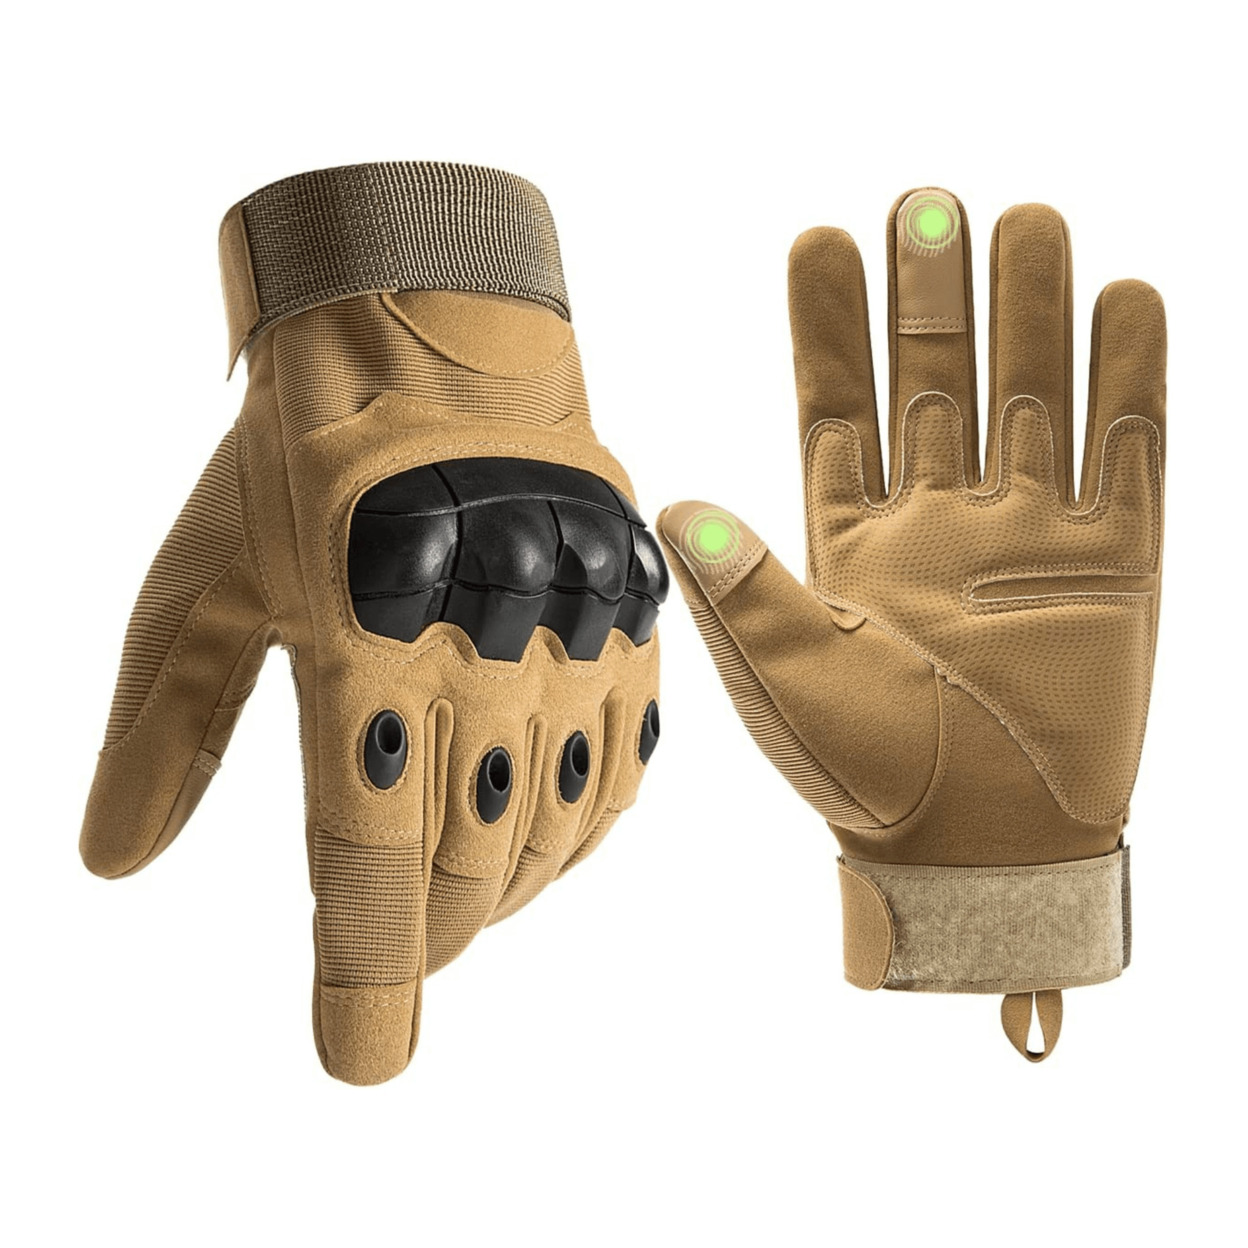 Tactical Military Airsoft Gloves For Outdoor Sports, Paintball, And Motorcycling With Touchscreen Fingertip Capability - Green, Medium